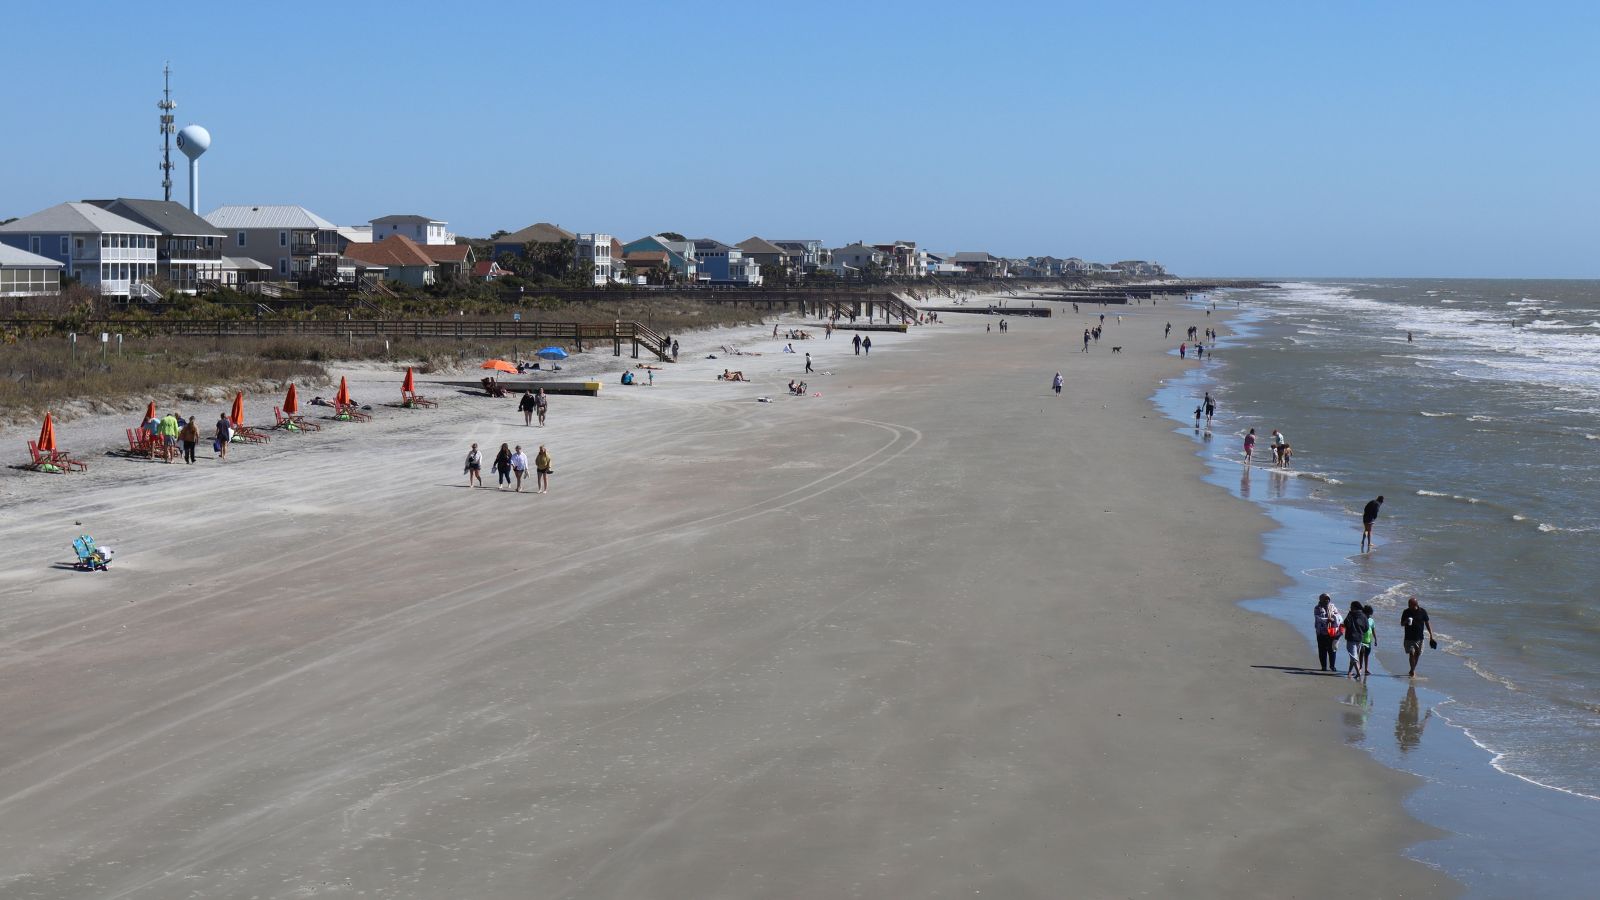 <p><a href="https://www.farandwide.com/s/best-small-beach-towns-united-states-6e7f0e8f46d24b9e">Far & Wide</a> writes, “The Folly Beach Pier is the focal point of this pretty little beach town. It creates the perfect place for people to take strolls, fish and watch the sunrise.” Because it’s a small beach town, Folly Beach is a great place to relocate to if you’re after a relaxed lifestyle. </p>